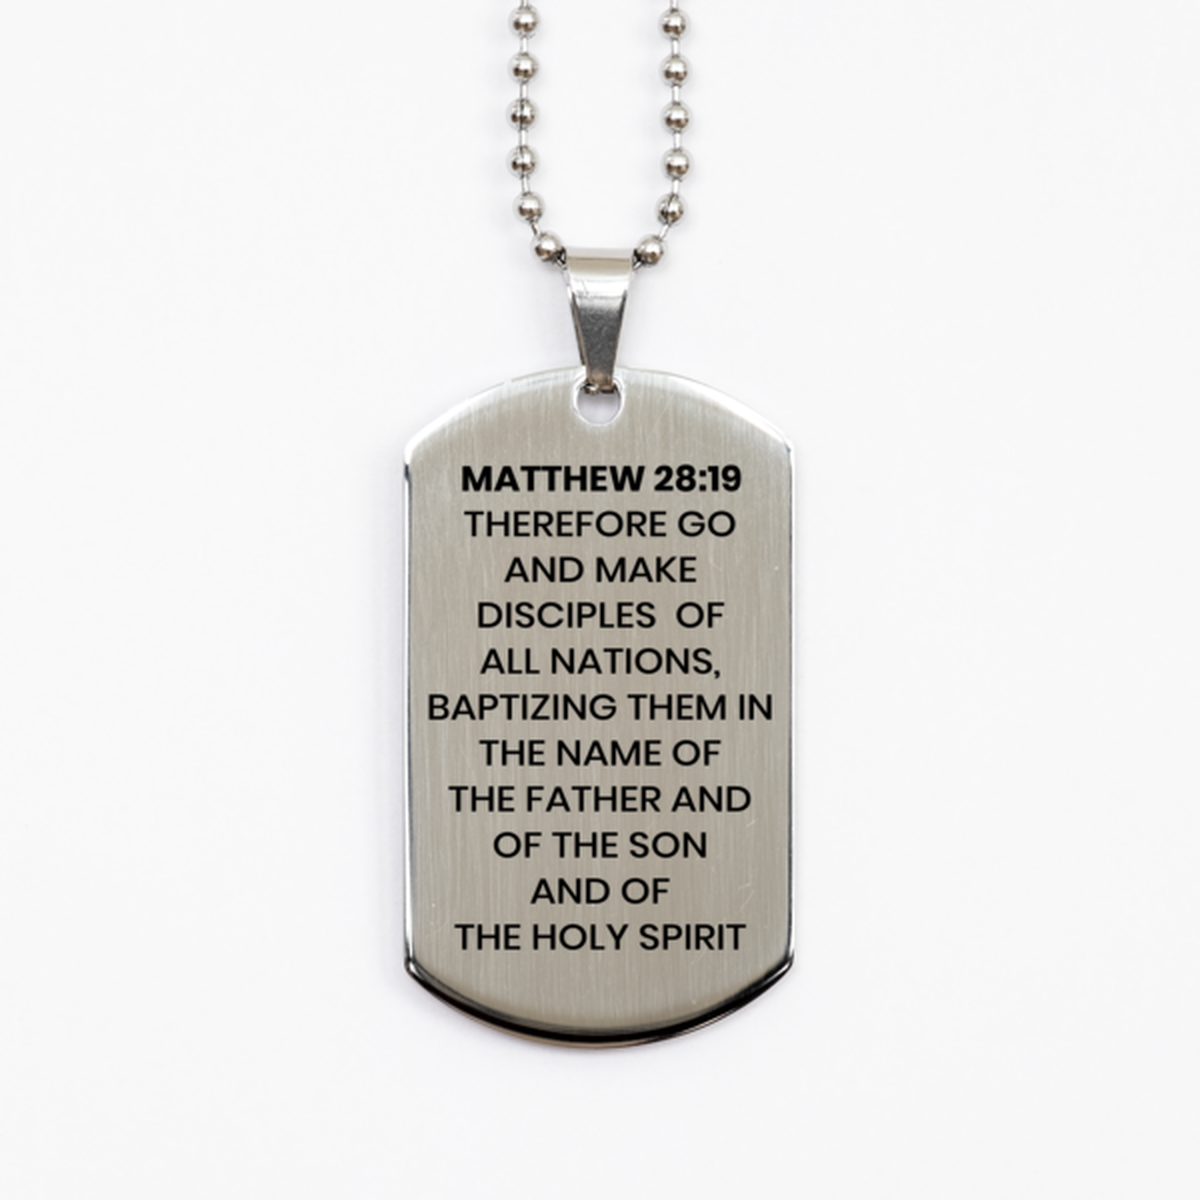 Matthew 28:19 Necklace, Bible Verse Necklace, Christian Necklace, Christian Birthday Gift, Stainless Steel Dog Tag Necklace, Gift for Christian.